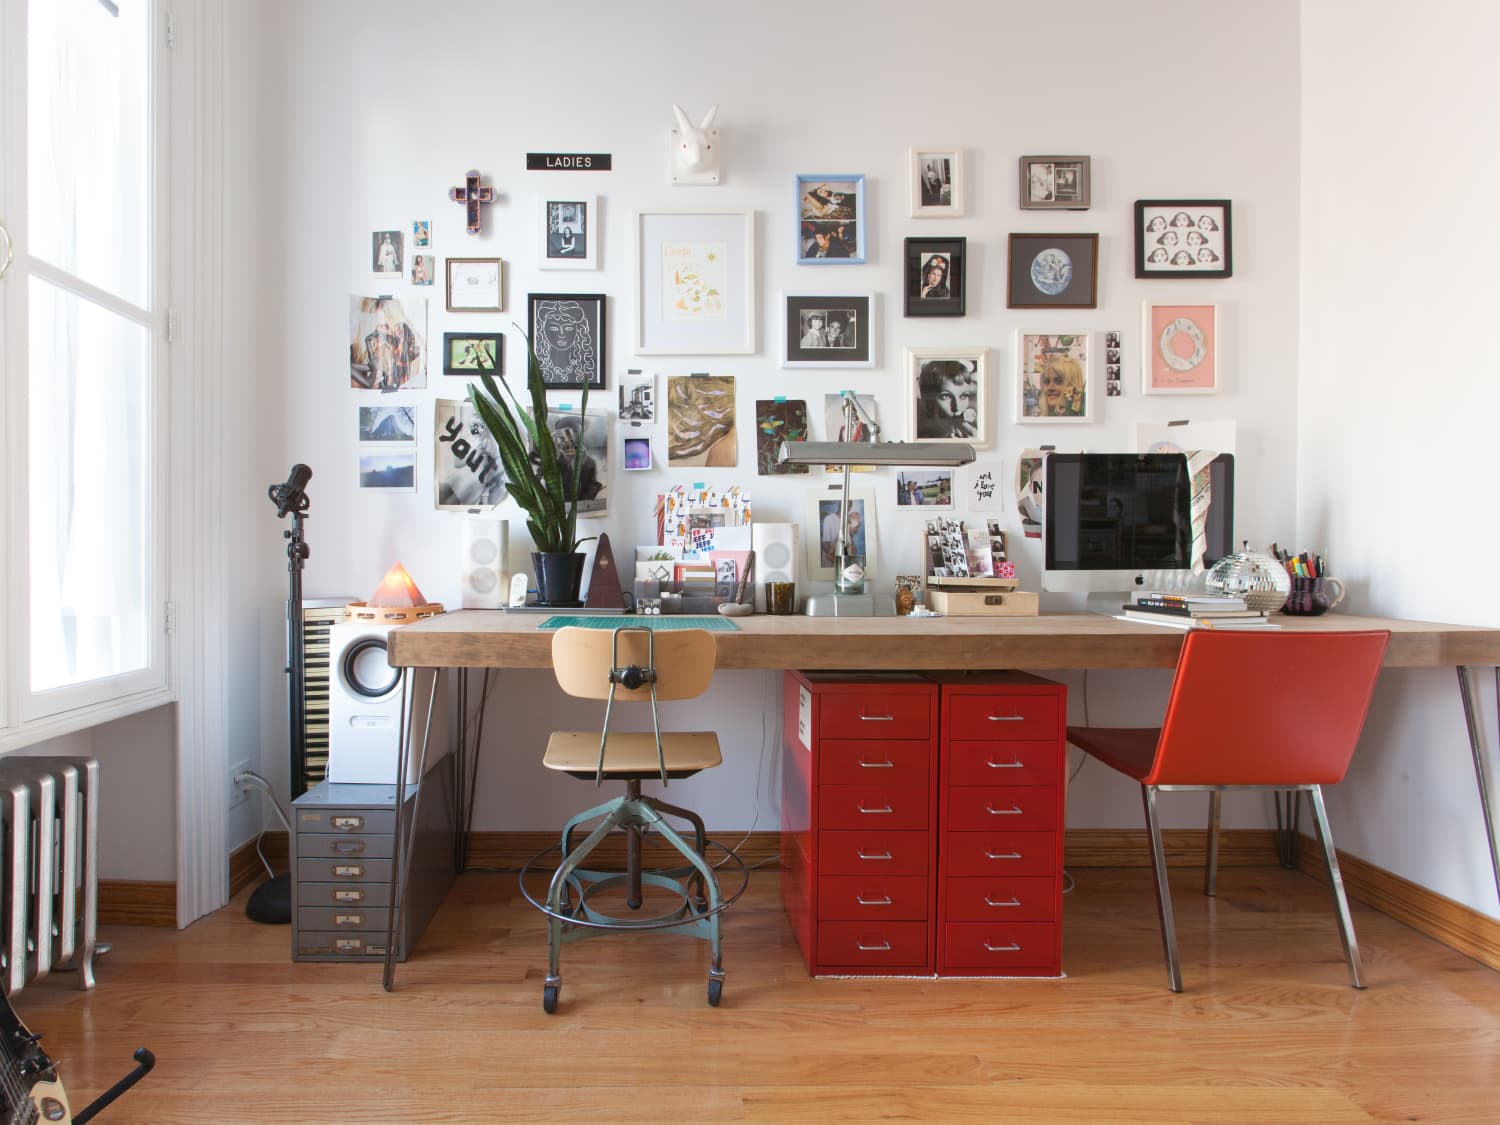 Women's home office ideas on a budget - Chalking Up Success!